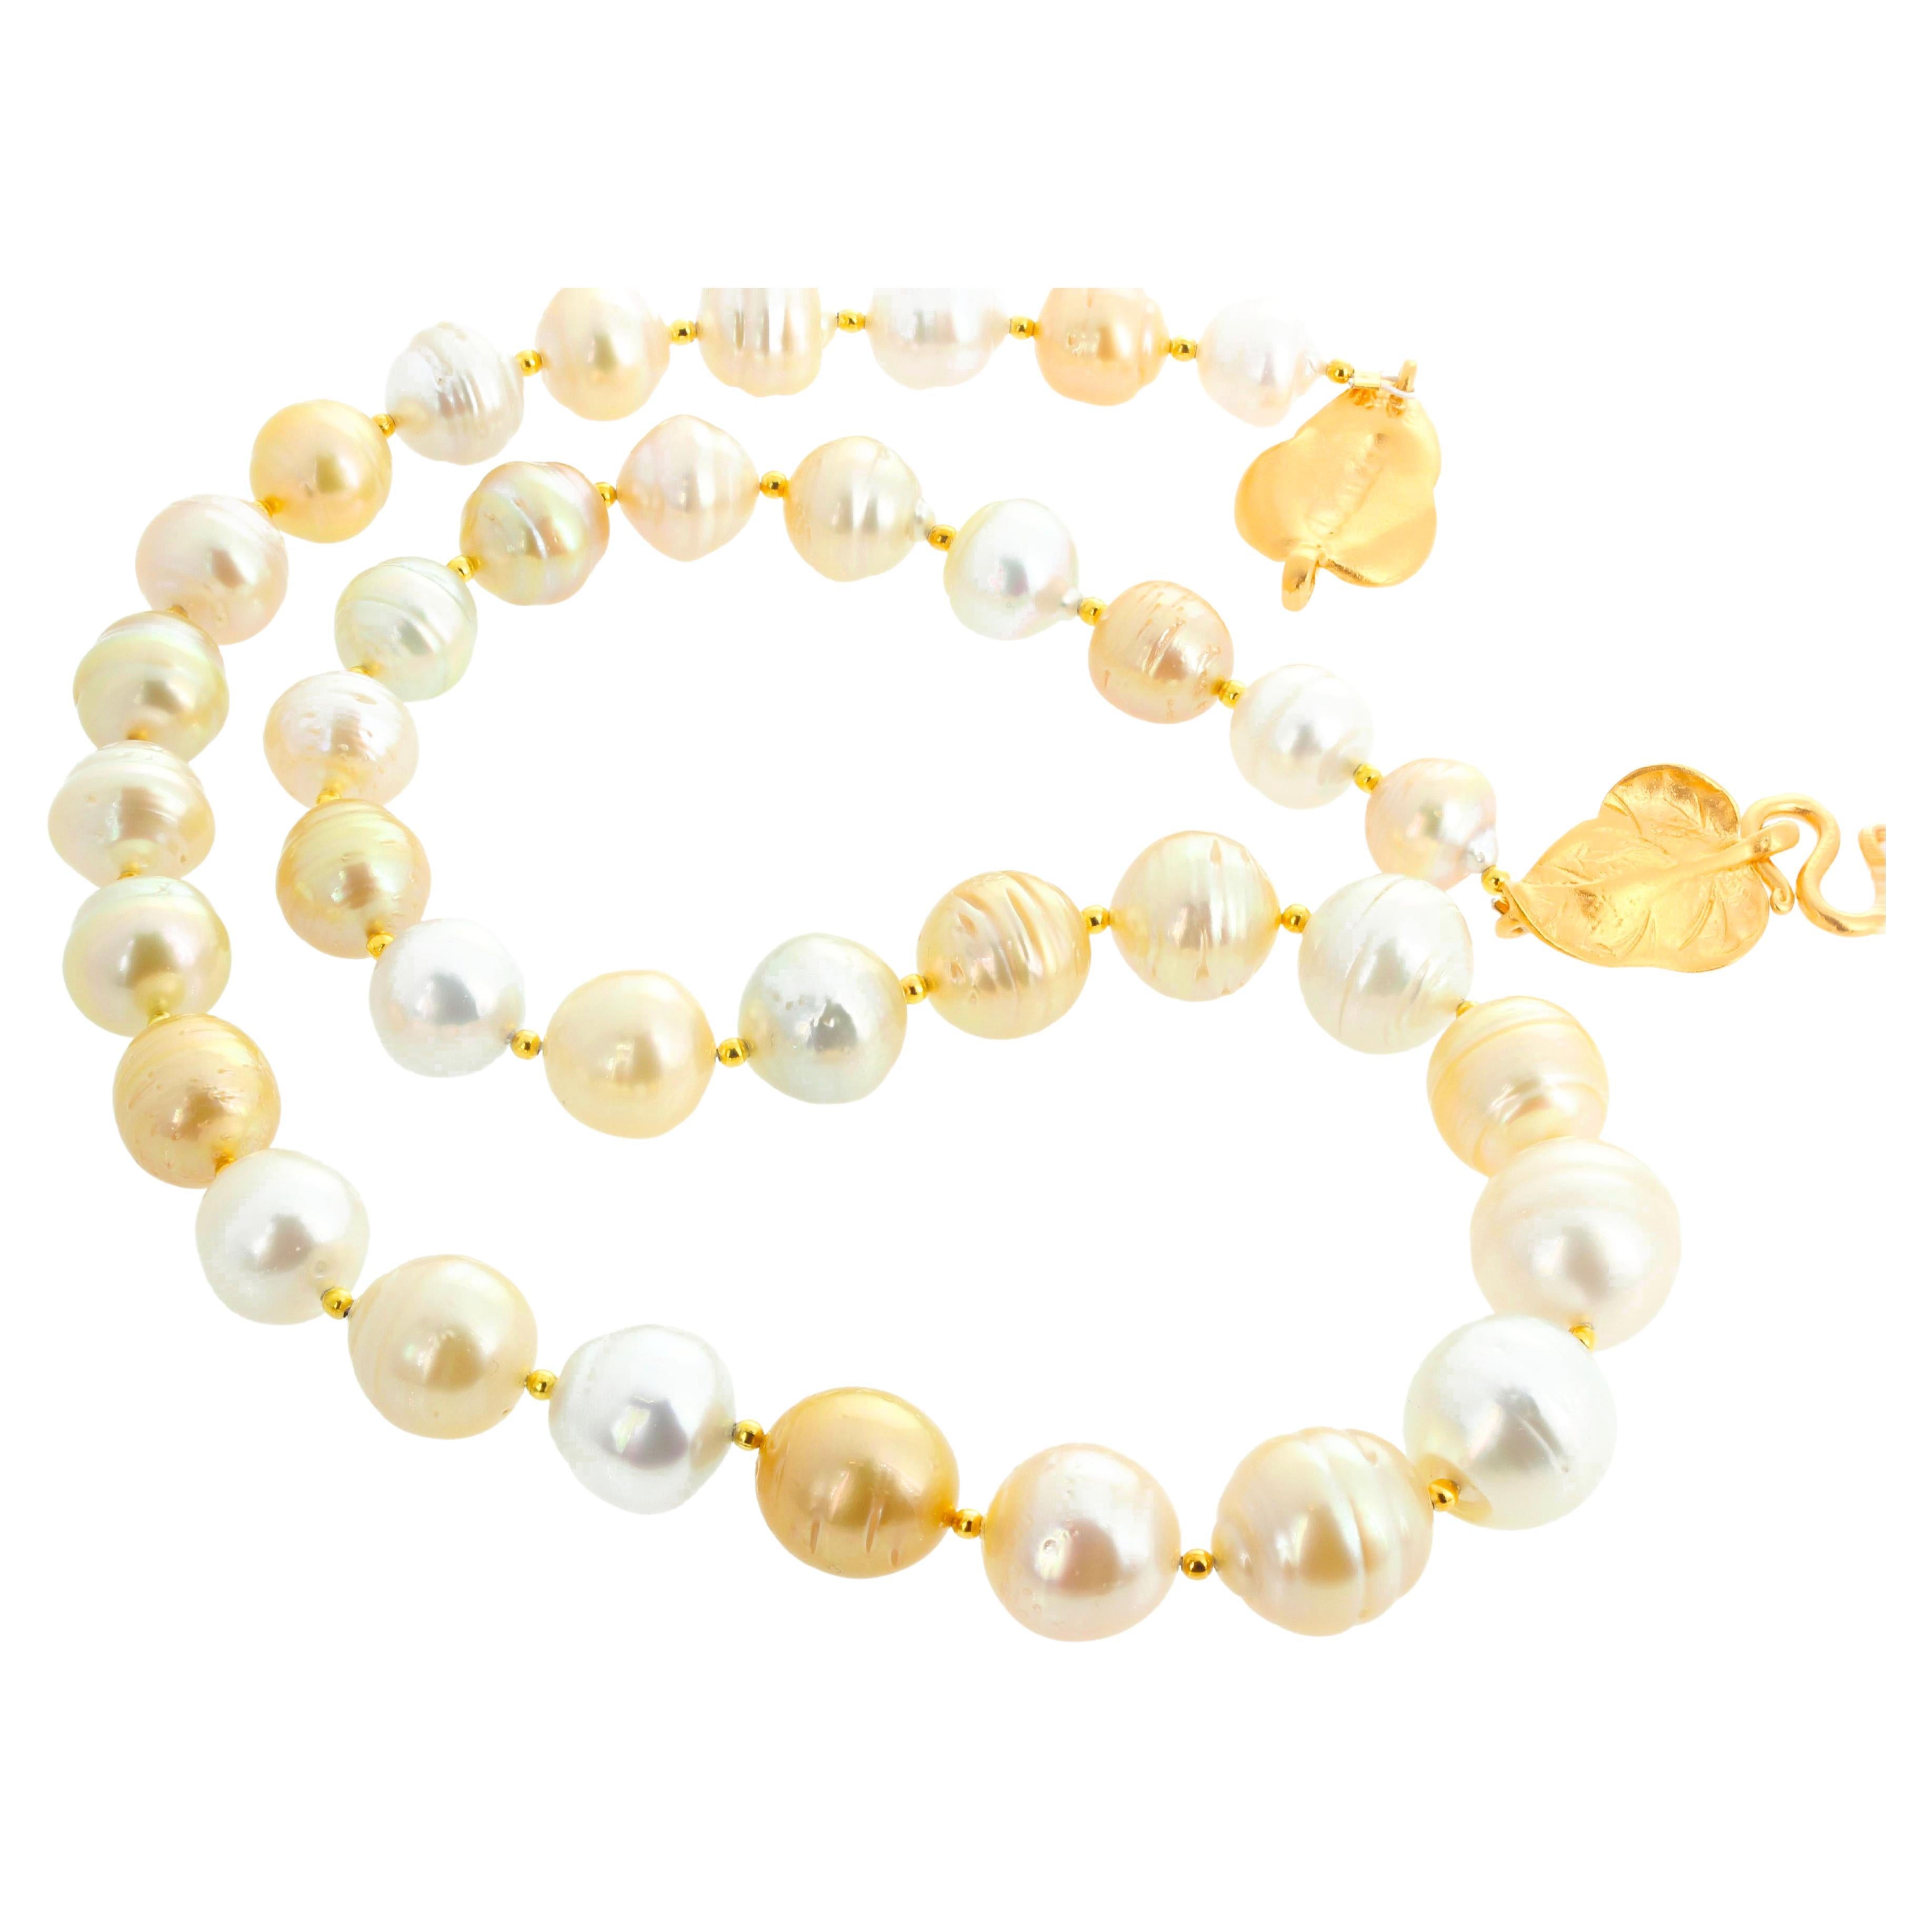 AJD South Sea Shimmering Elegant Real Cultured Pearls w/ Vermeil Gold Clasp